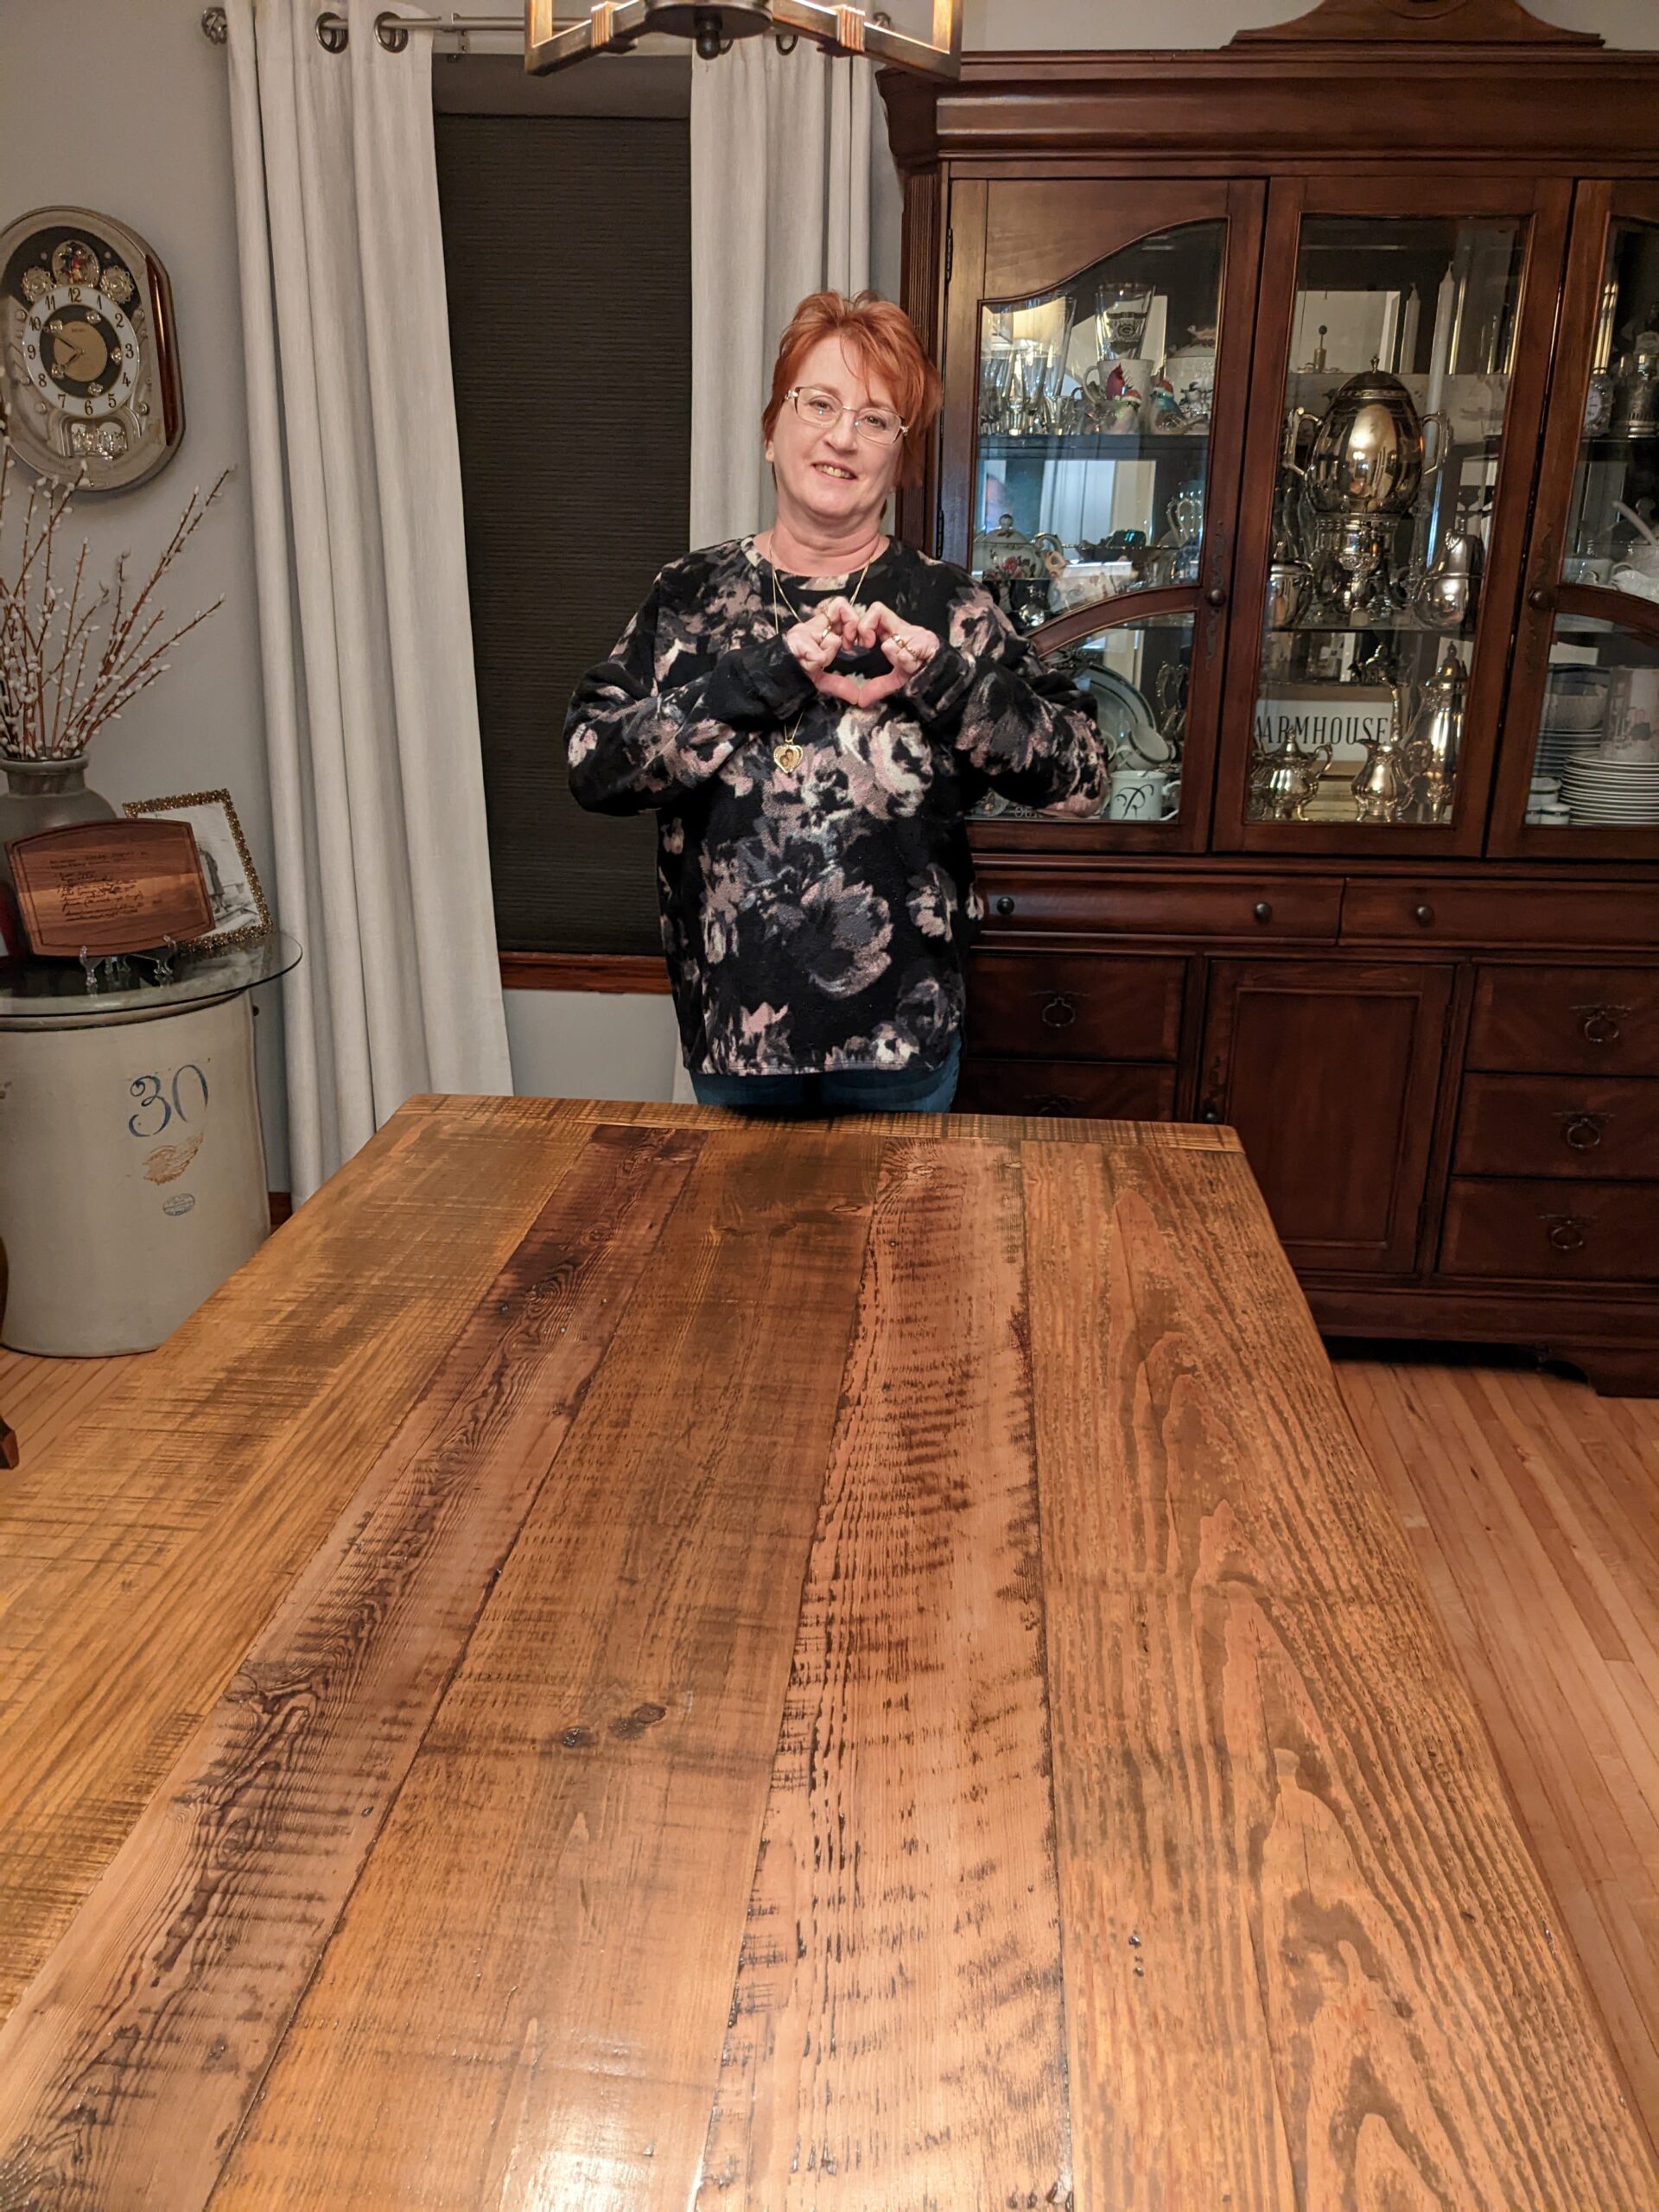 patty with her new reclaimed wood trestle table